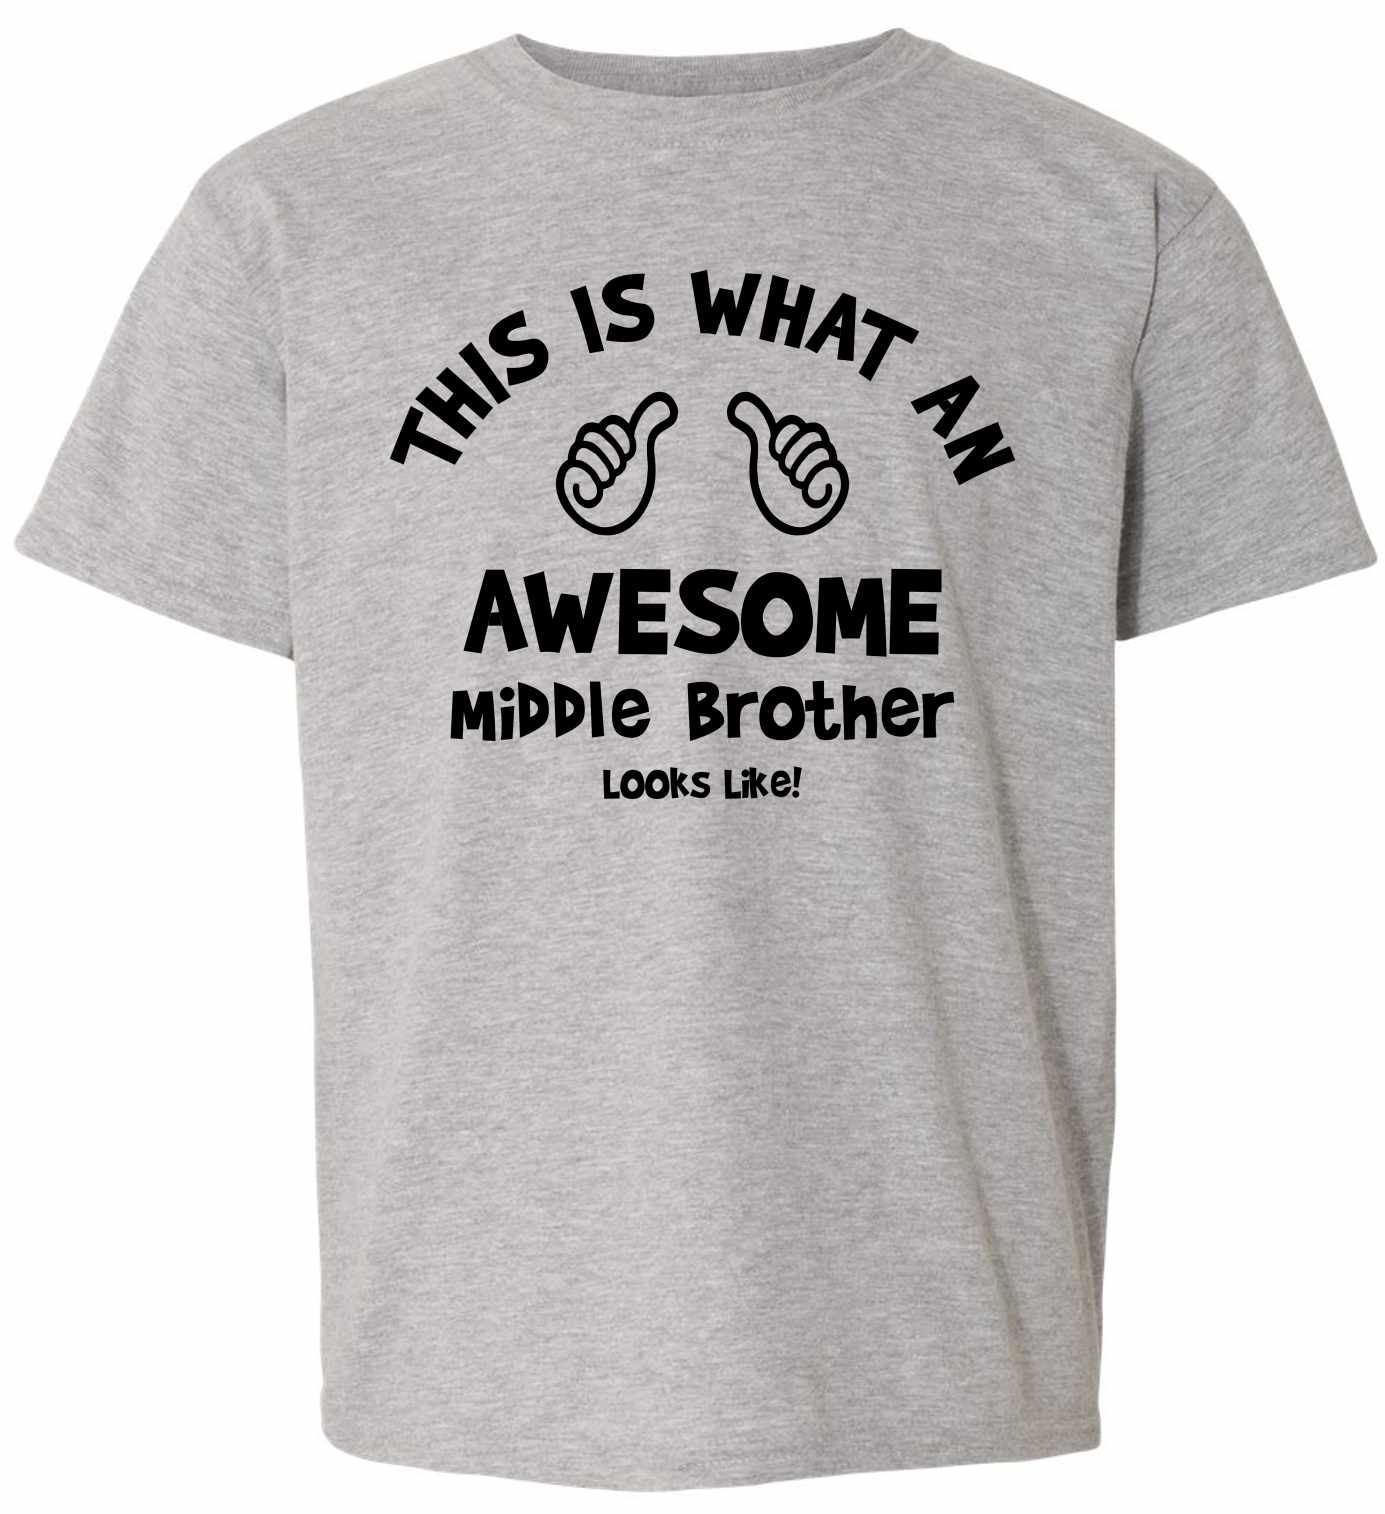 This Is What An Awesome Middle Brother Looks Like on Kids T-Shirt